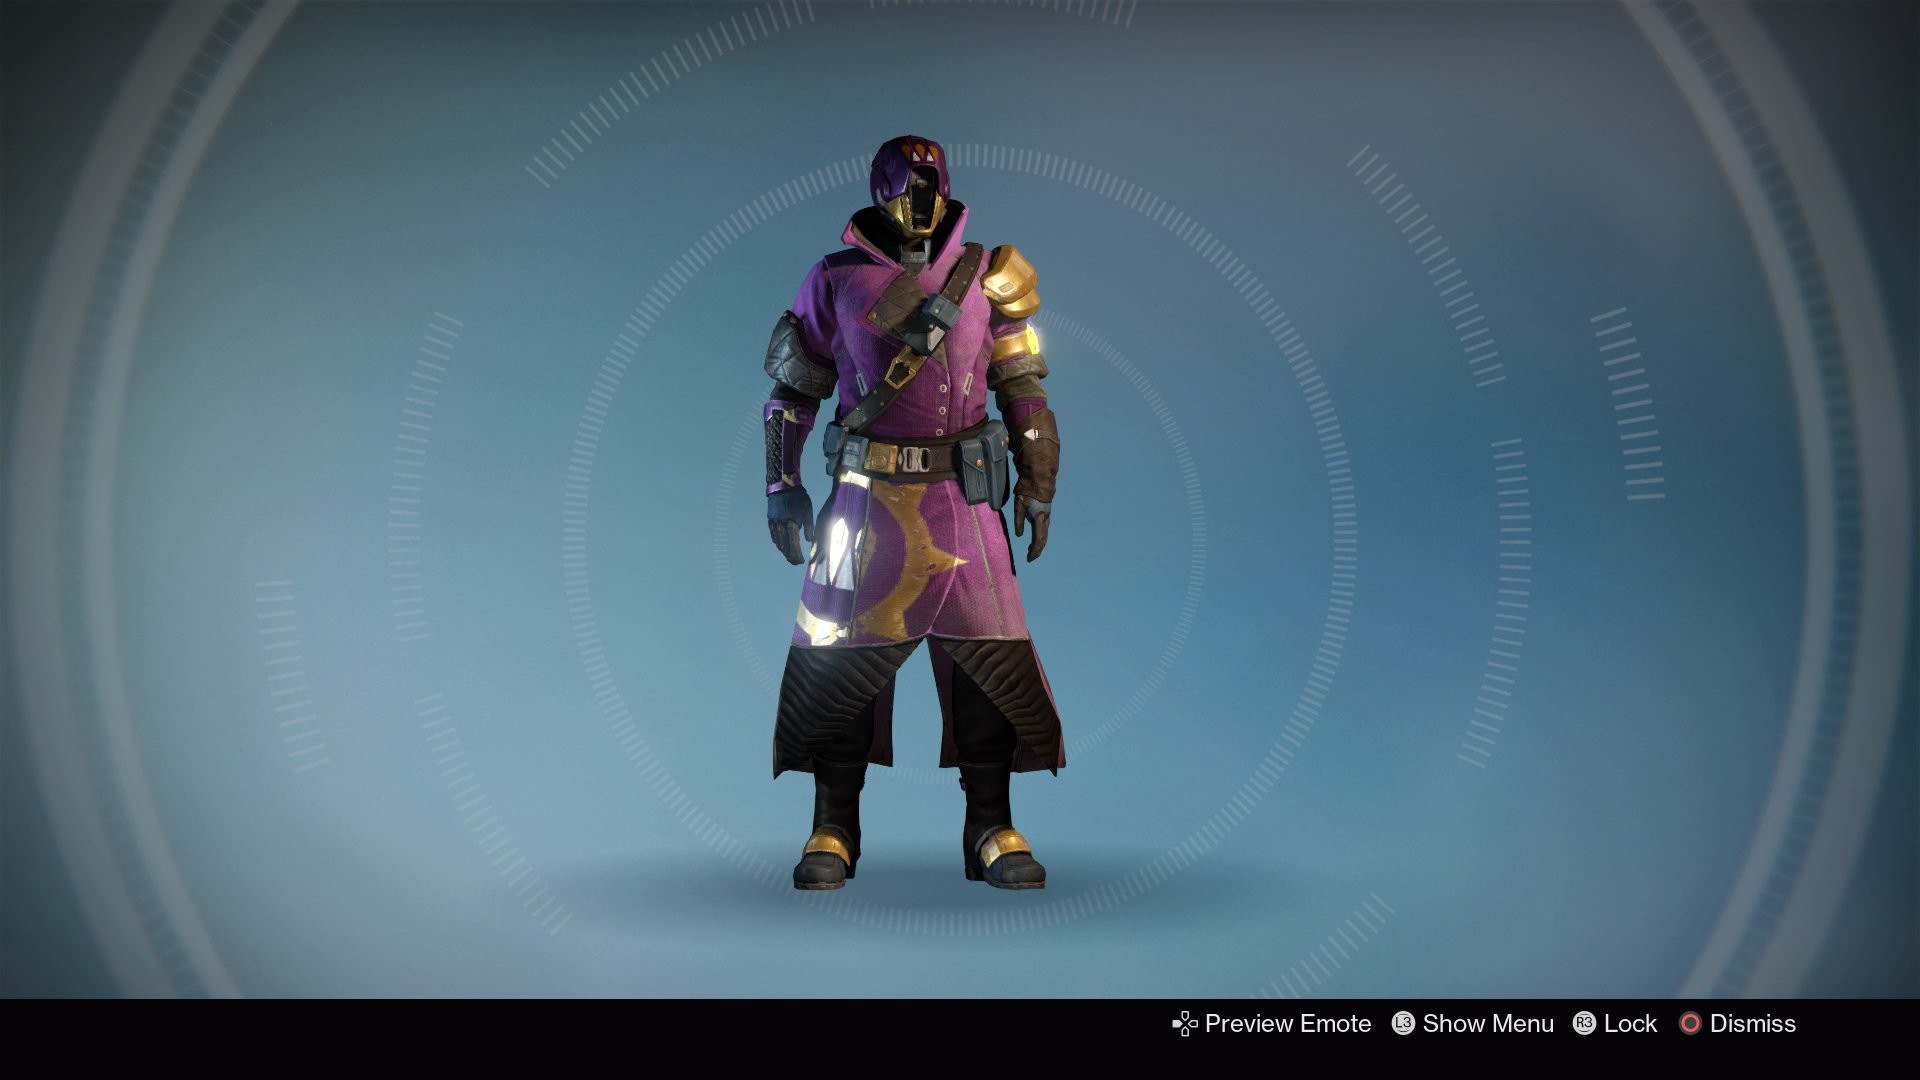 1920x1080 All Queens armor in Destiny in default shader. Warlock, Titan and Hunter.